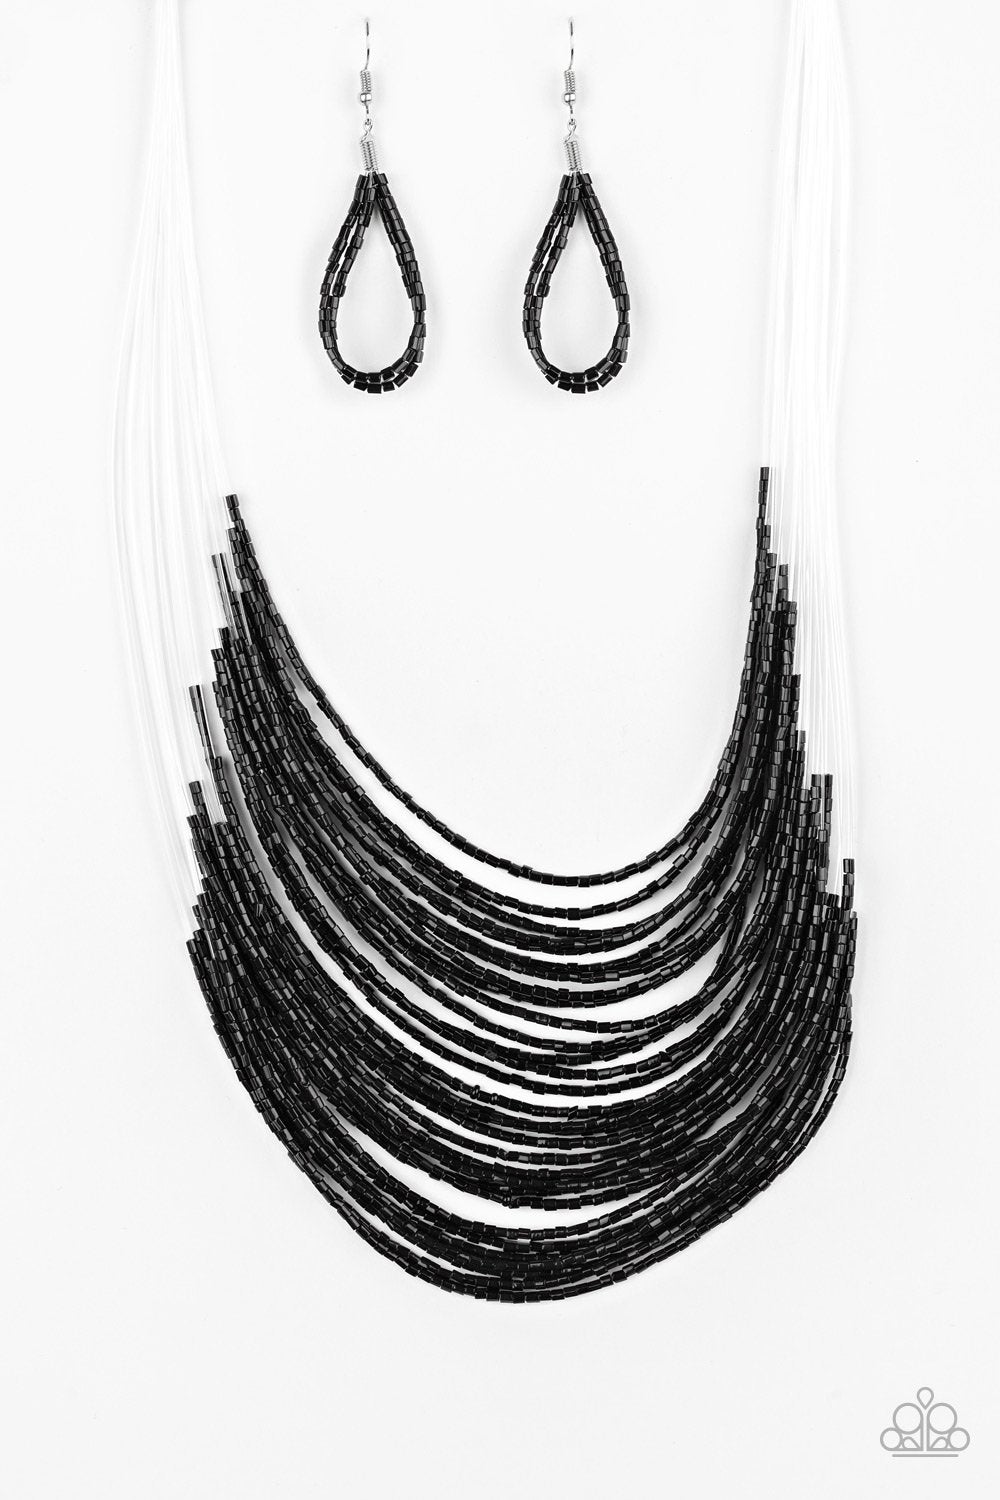 Catwalk Queen Black Seed Bead Necklace - Paparazzi Accessories- lightbox - CarasShop.com - $5 Jewelry by Cara Jewels